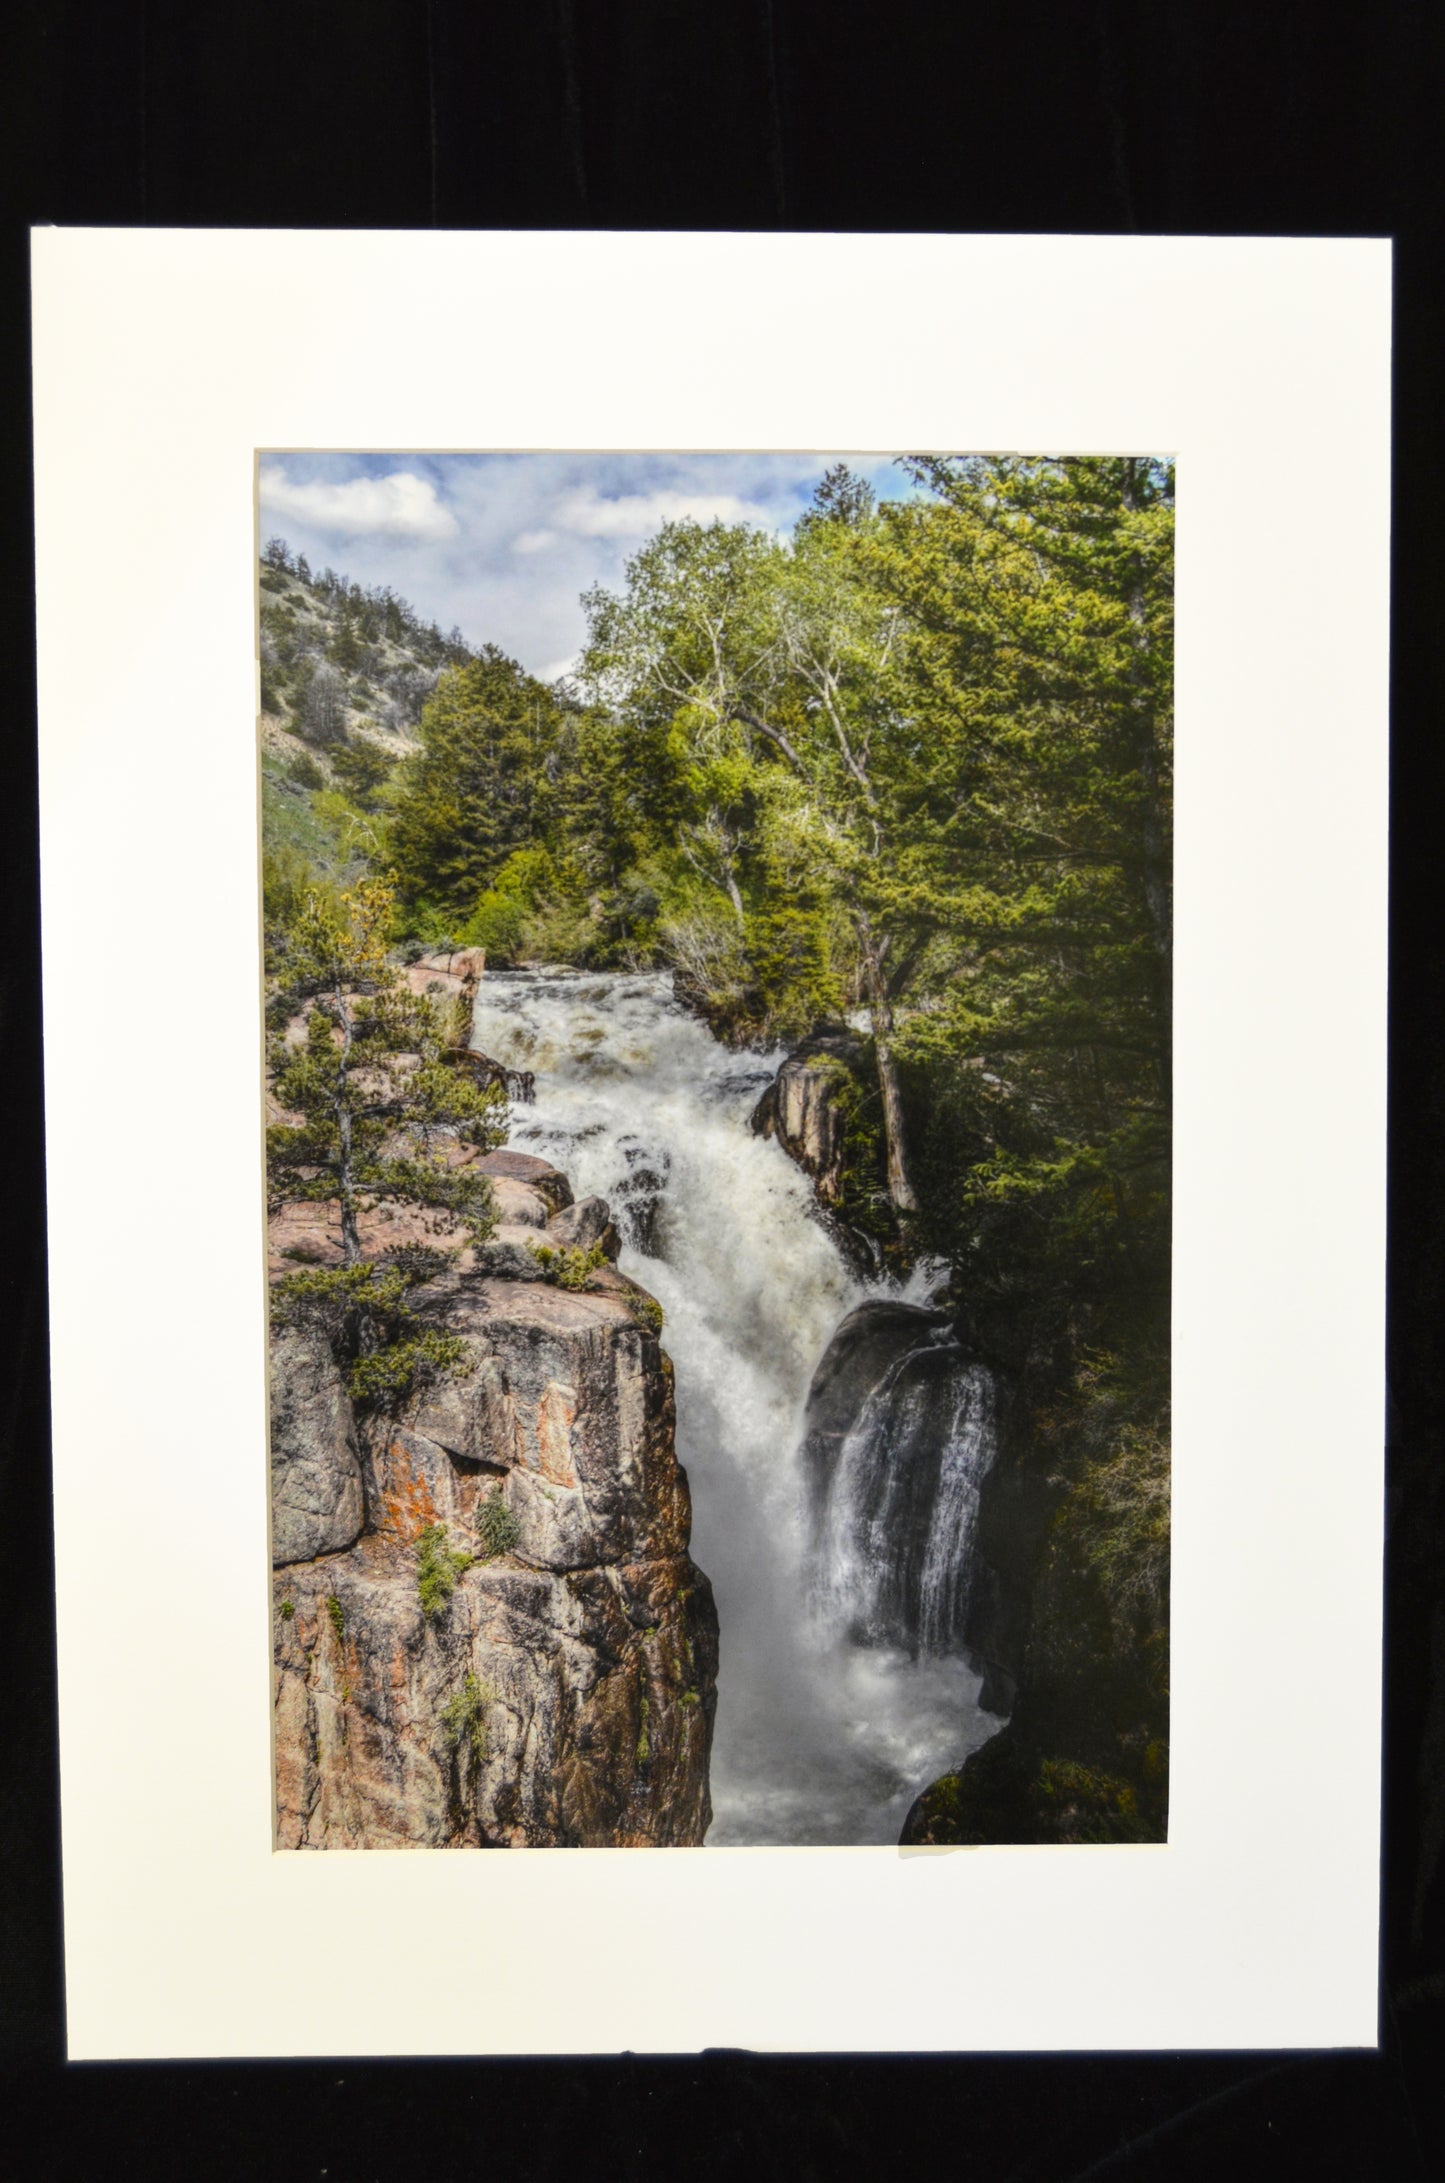 " Shell Falls " Matted Luster Print Photographer: Rowena Trapp Shell Falls Luster Matted Print                            The image was taken of Shell Falls   Bighorn Mountains of Wyoming during spring runoff  16.75" long x 10.75" wide luster print  2.5" wide white matting around the print  22" long x 16" wide in total  The mount board is thin containing acid free paperside of plastic sleeve for protection  Ready for a frame or to be displayed on an easel